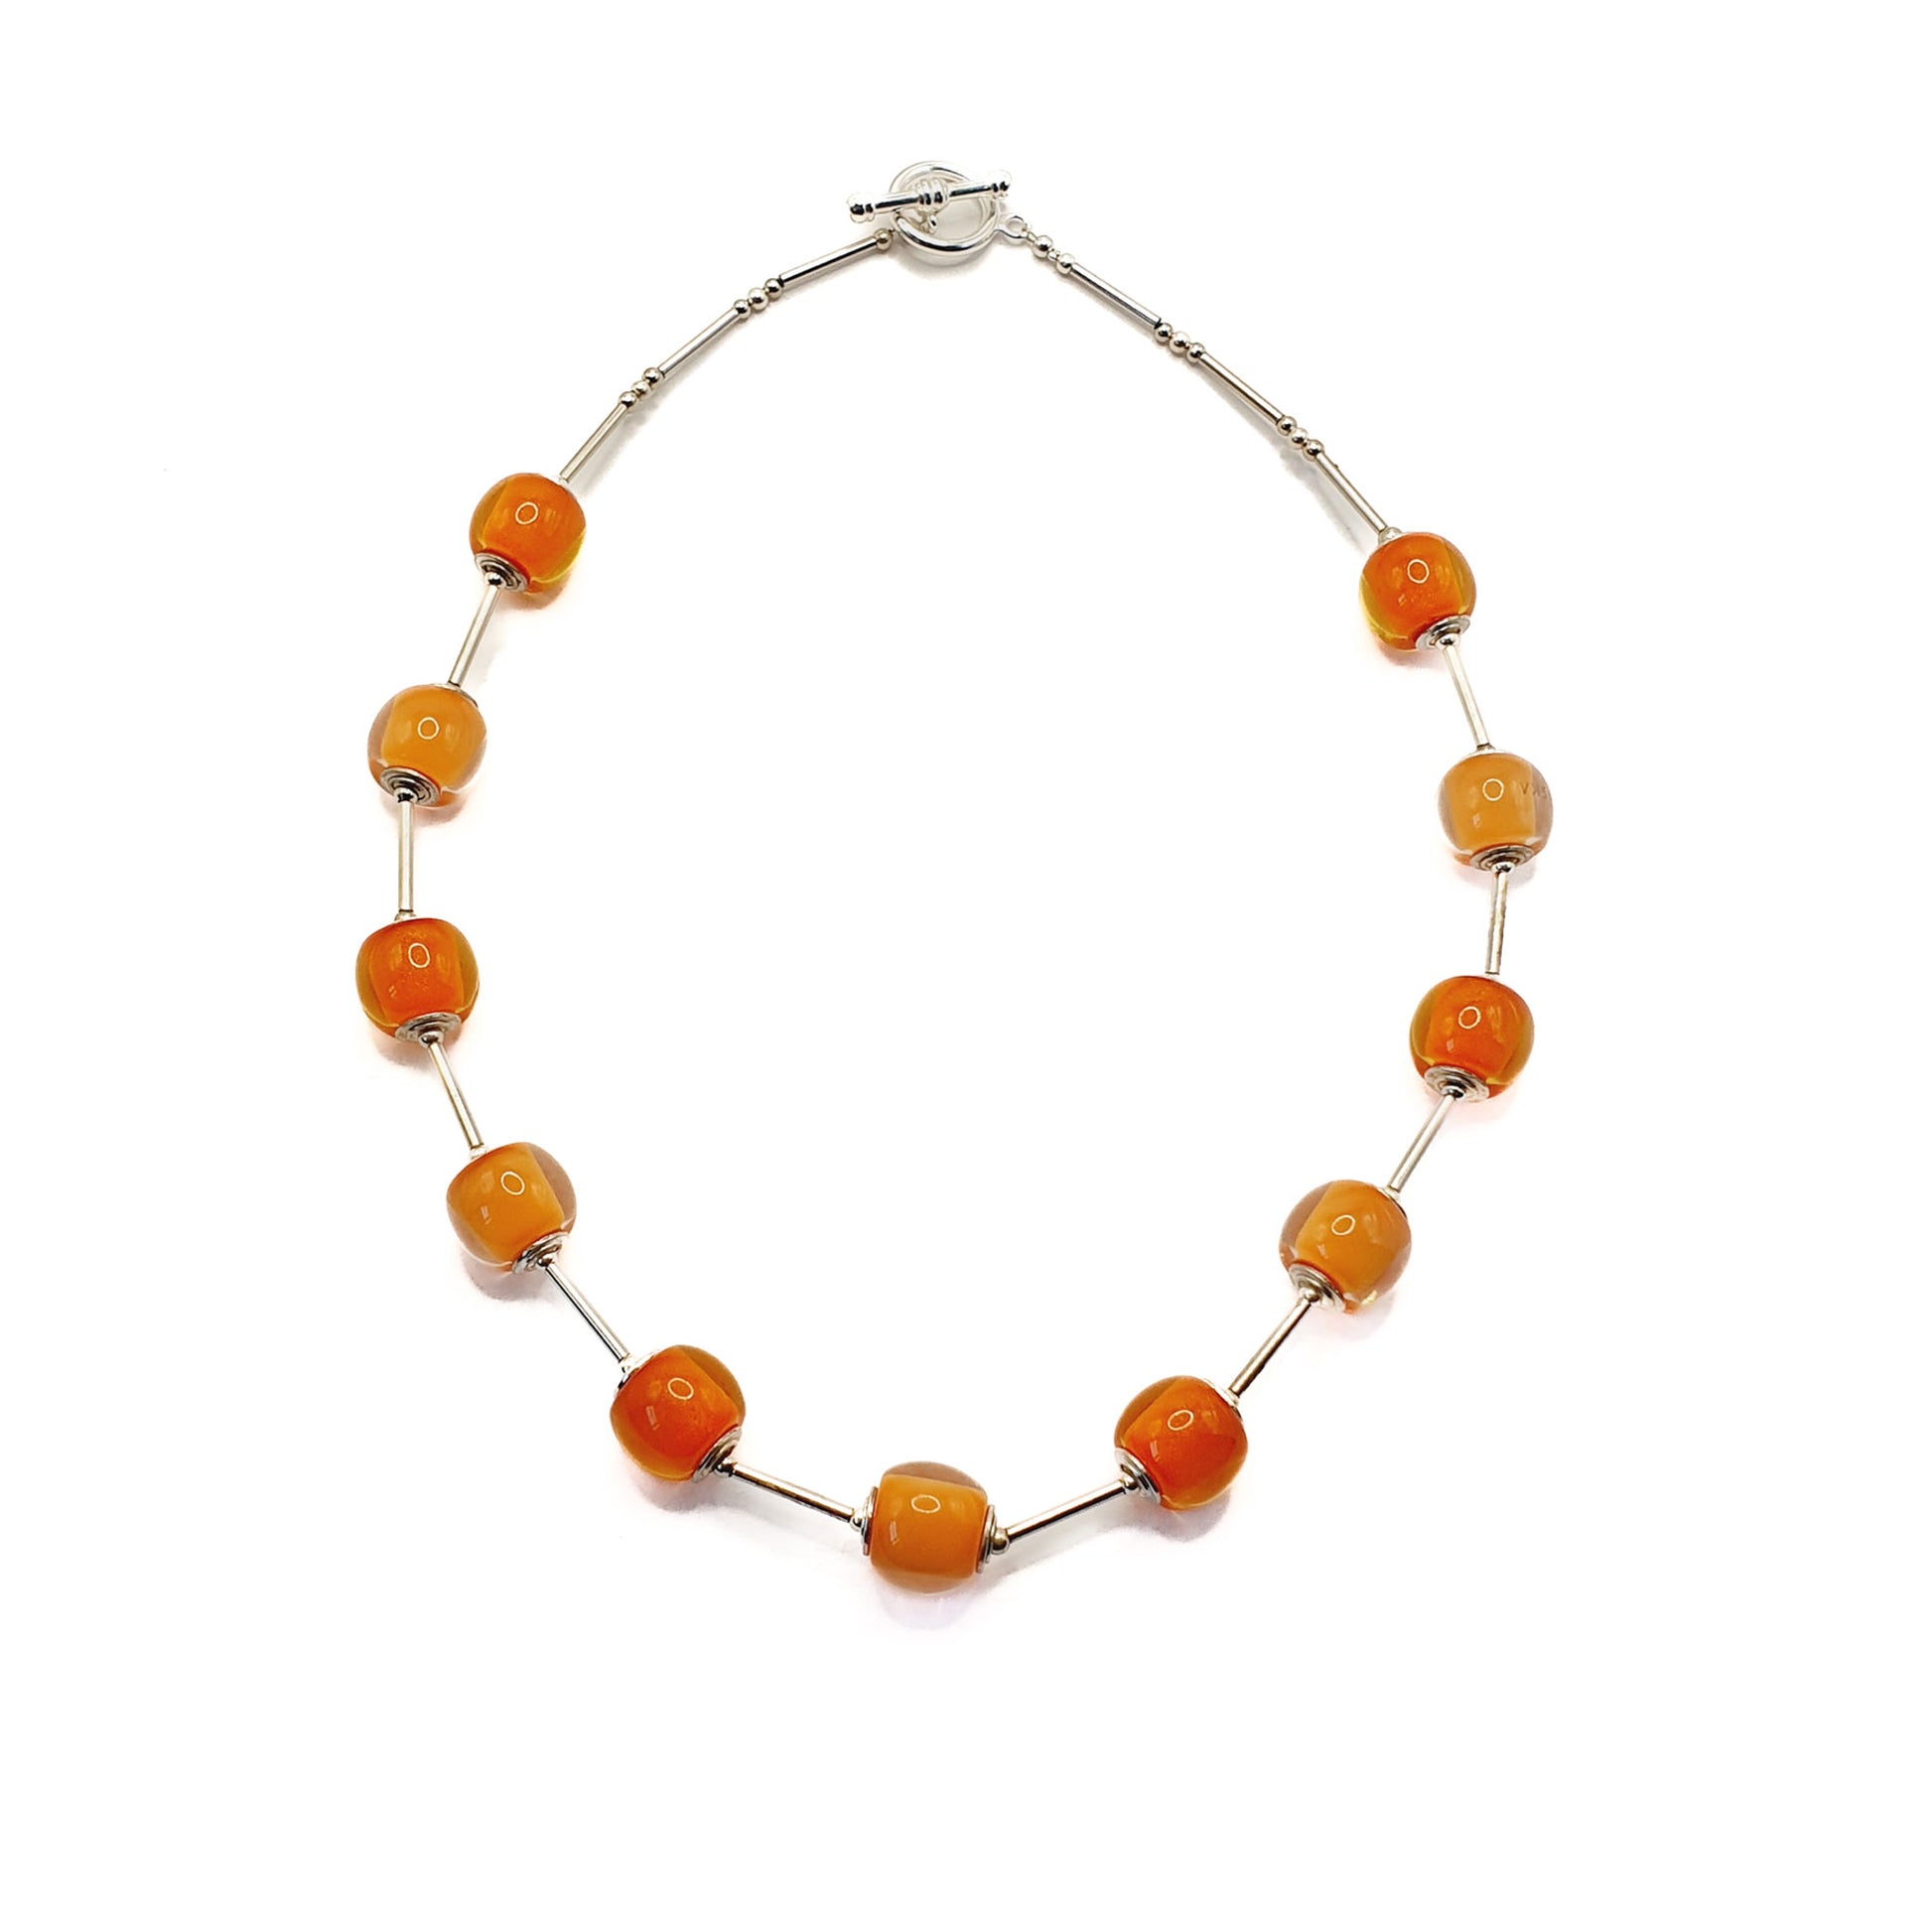 Zsiska orb necklace in soft and deep orange shades